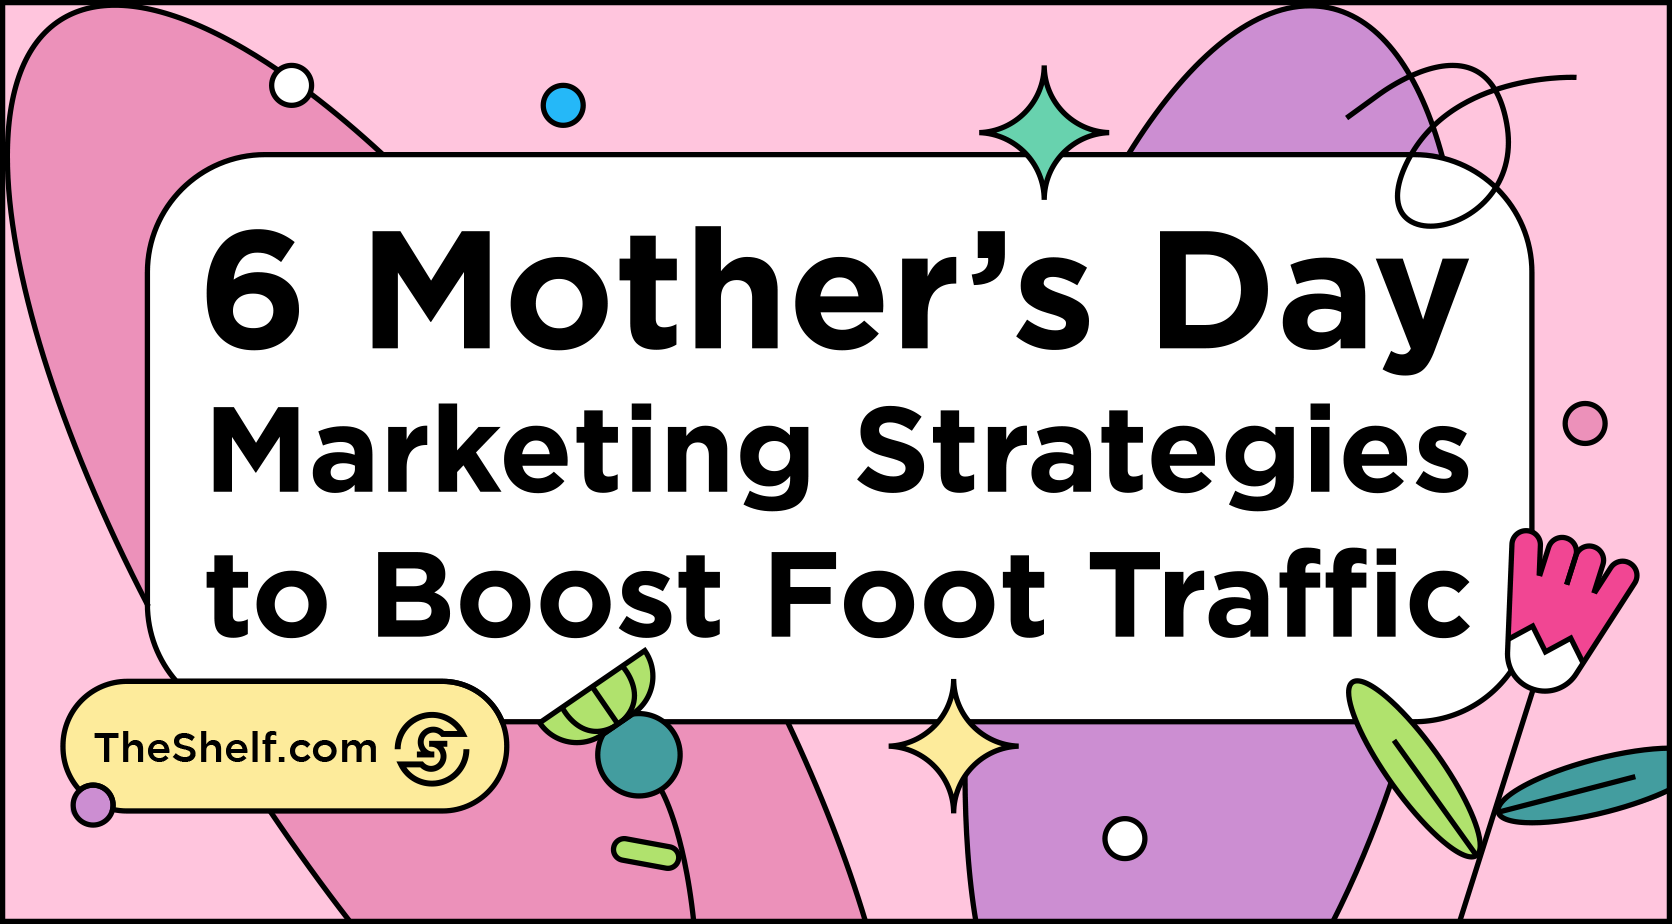 https://www.theshelf.com/wp-content/uploads/2022/05/6_Mothers_Day_Marketing_Strategies_to_Boost_Foot_Traffic_title_webp.webp